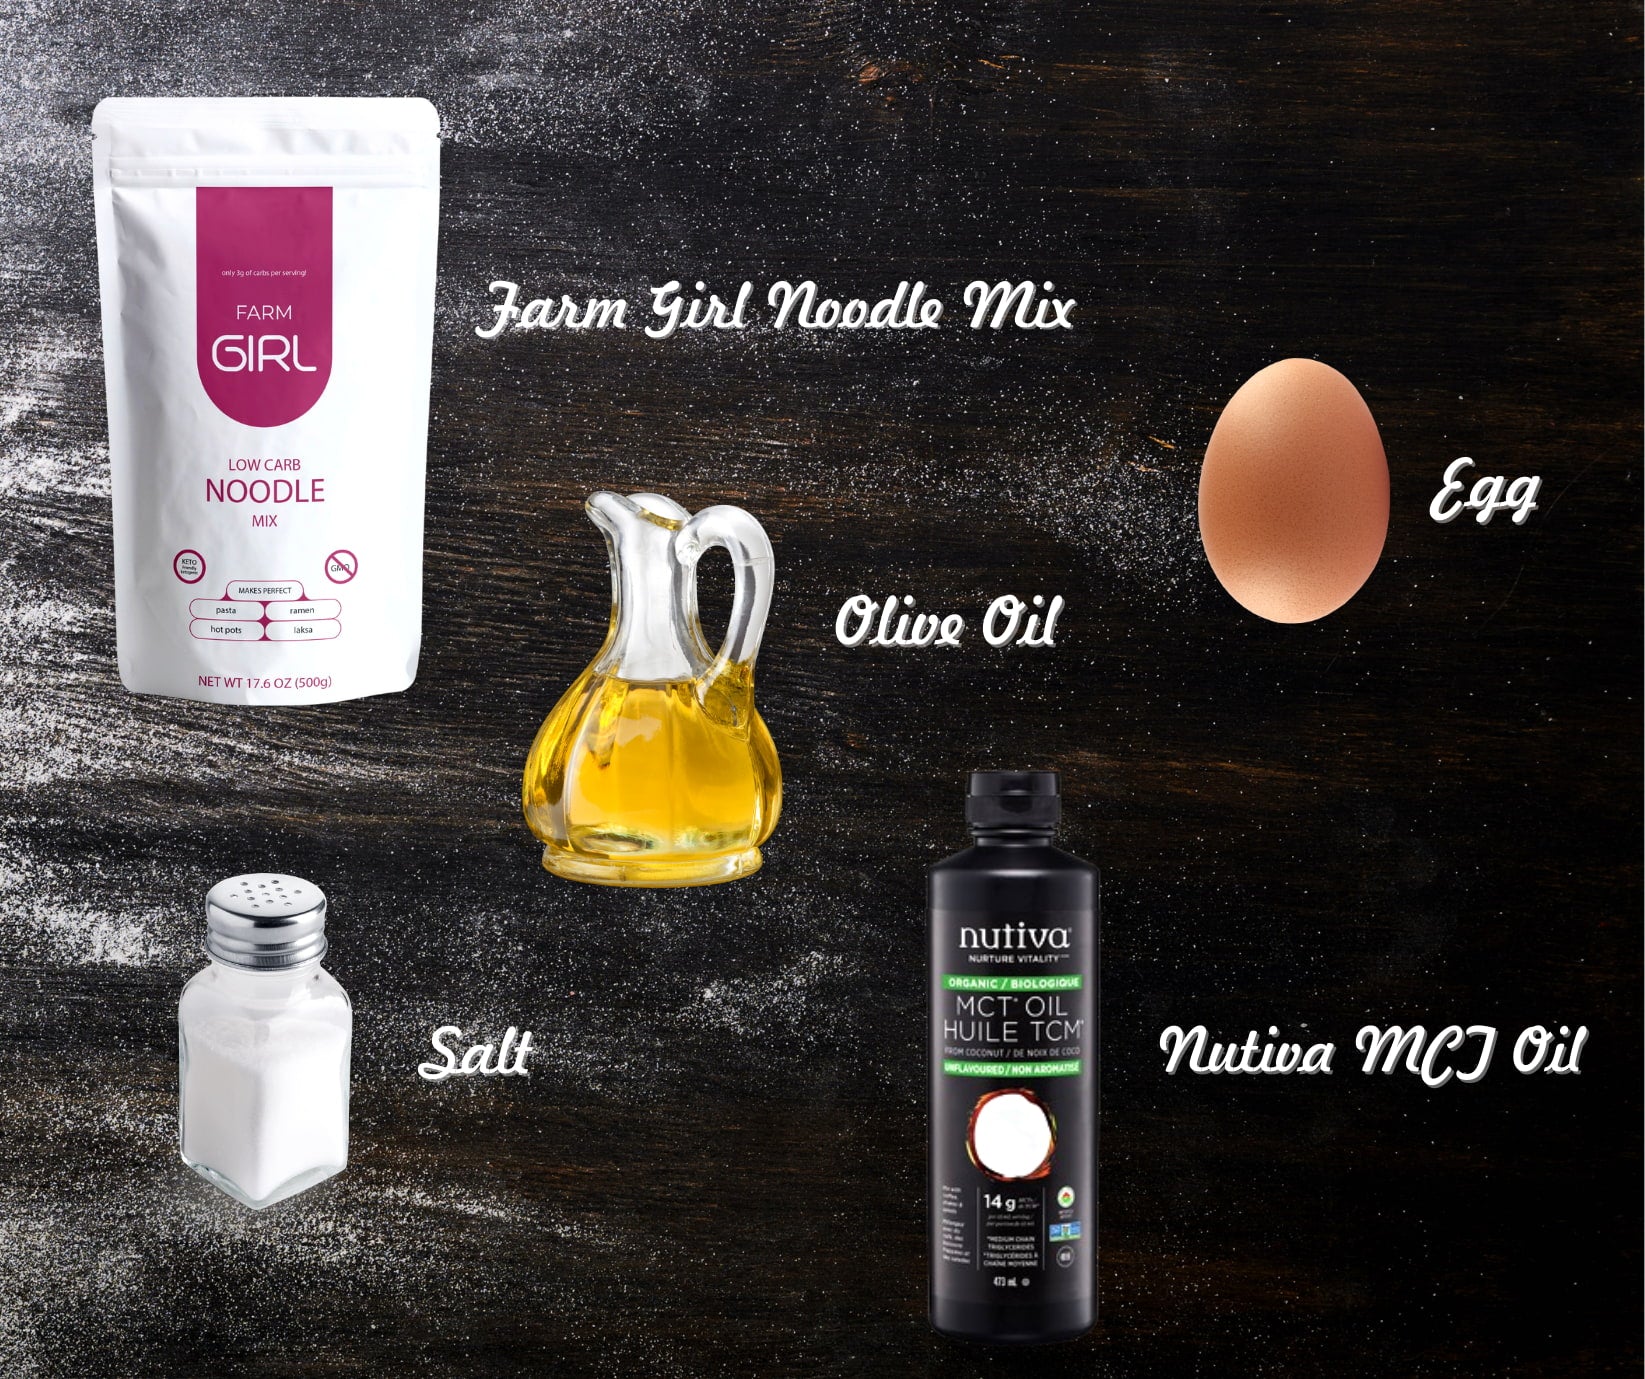 A picture of ingredients like olive oil, MCT oil, Farm Girl noodle mix, egg and salt.